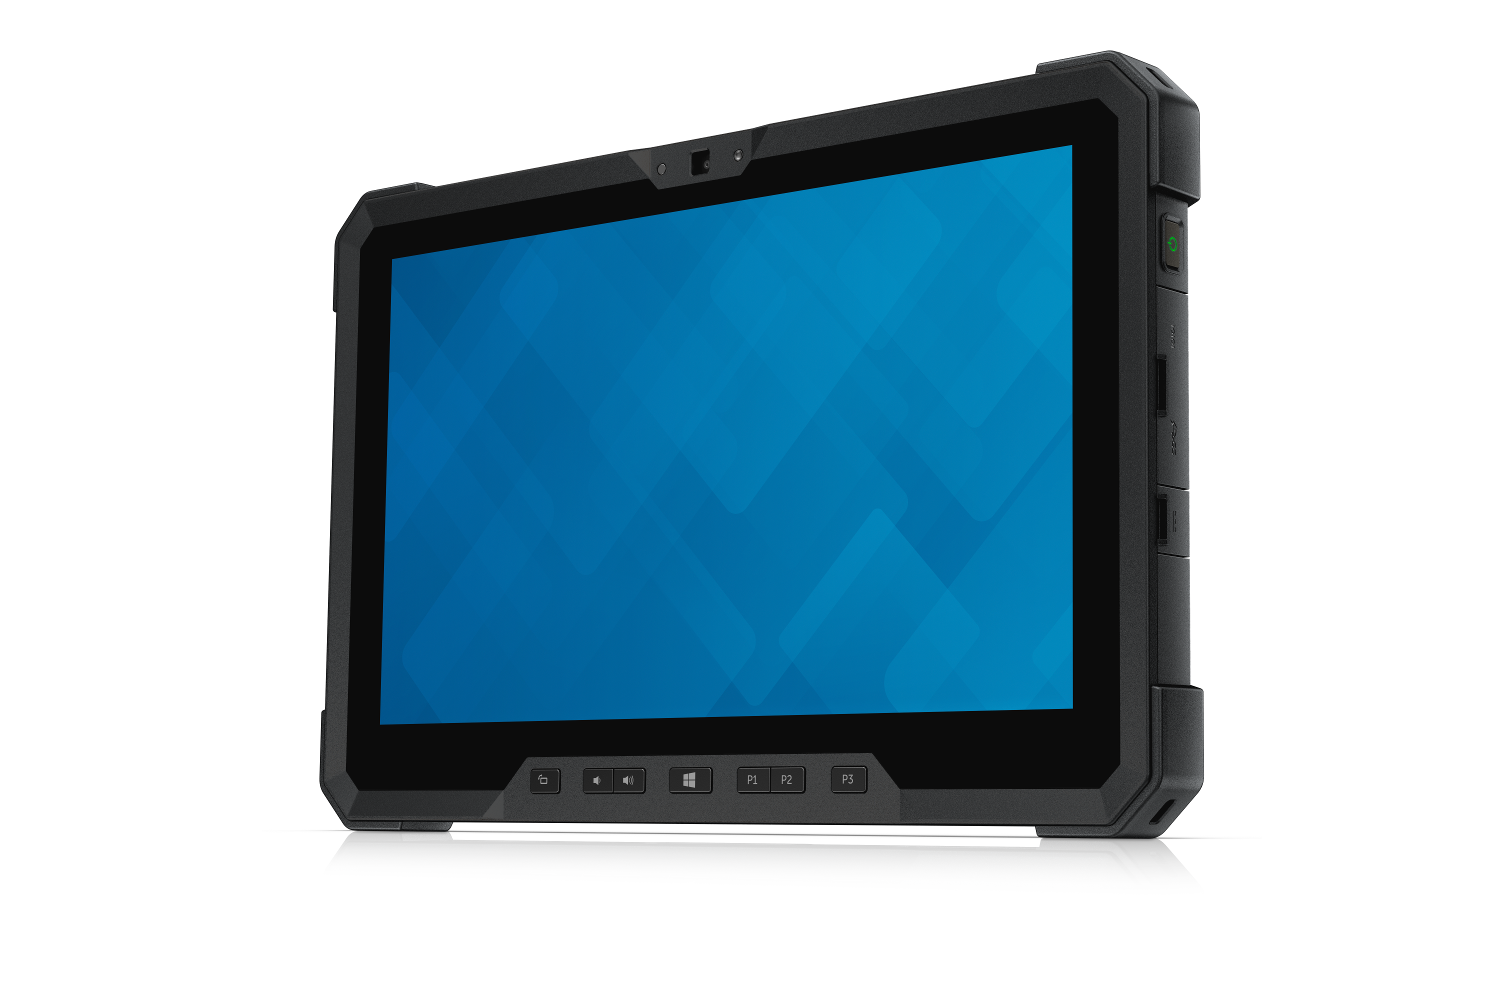 tough stuff dells new latitude 12 rugged tablet is the right tool for any job nobg